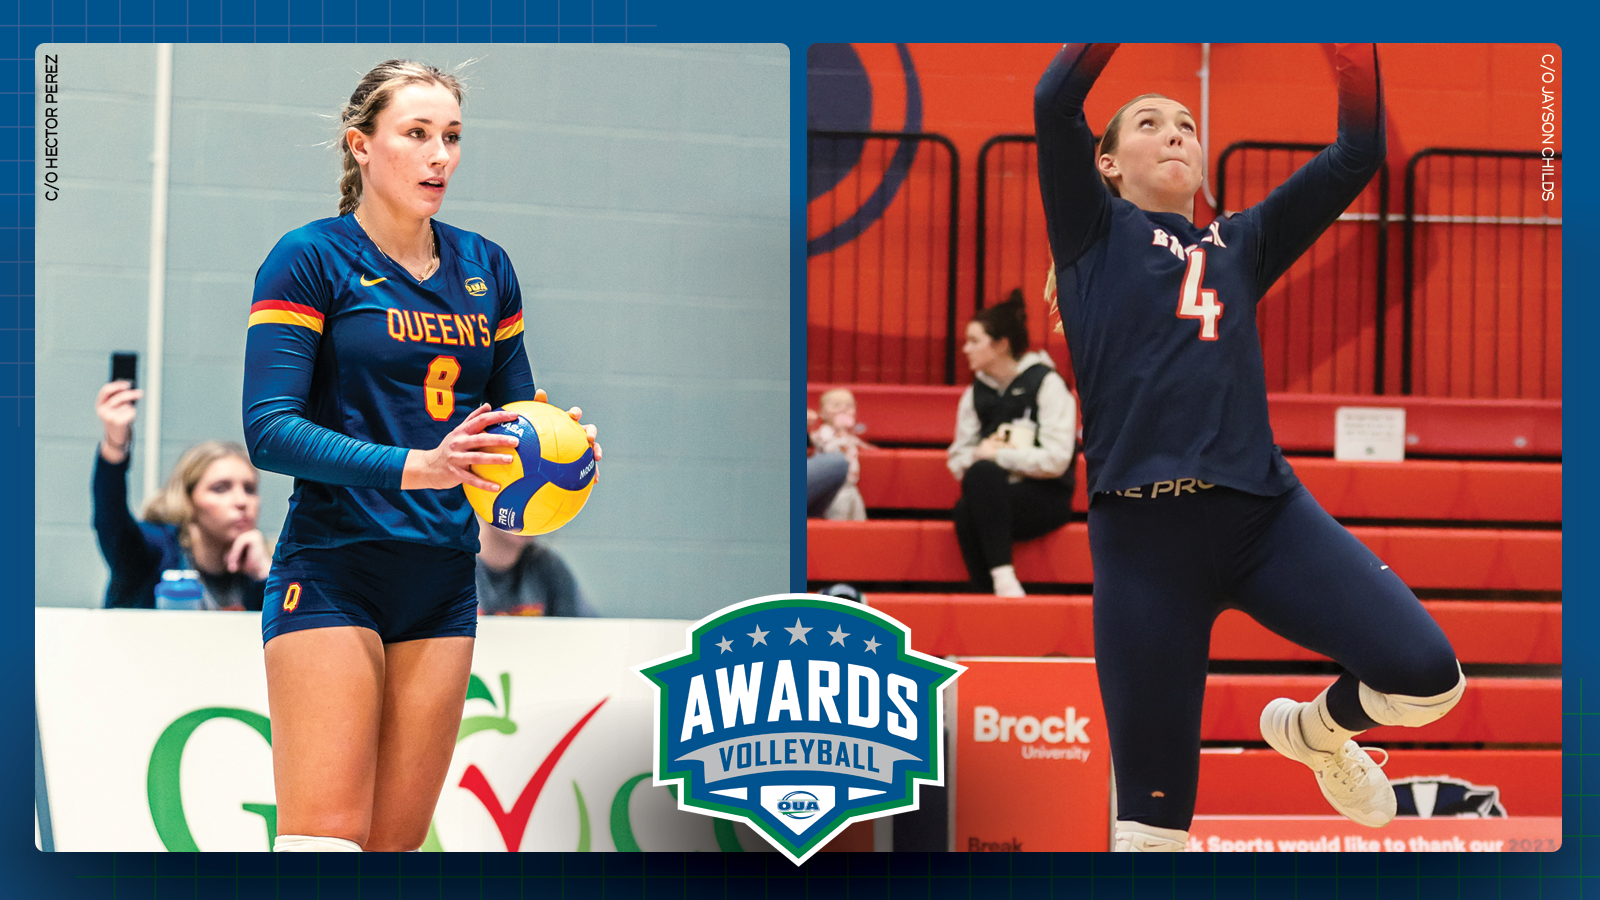 Graphic on blue background featuring action photos of Queen's women's volleyball player Hannah Duchesneau and Brock women's volleyball player Sara Rohr, with the OUA Volleyball Awards logo centered in the lower third